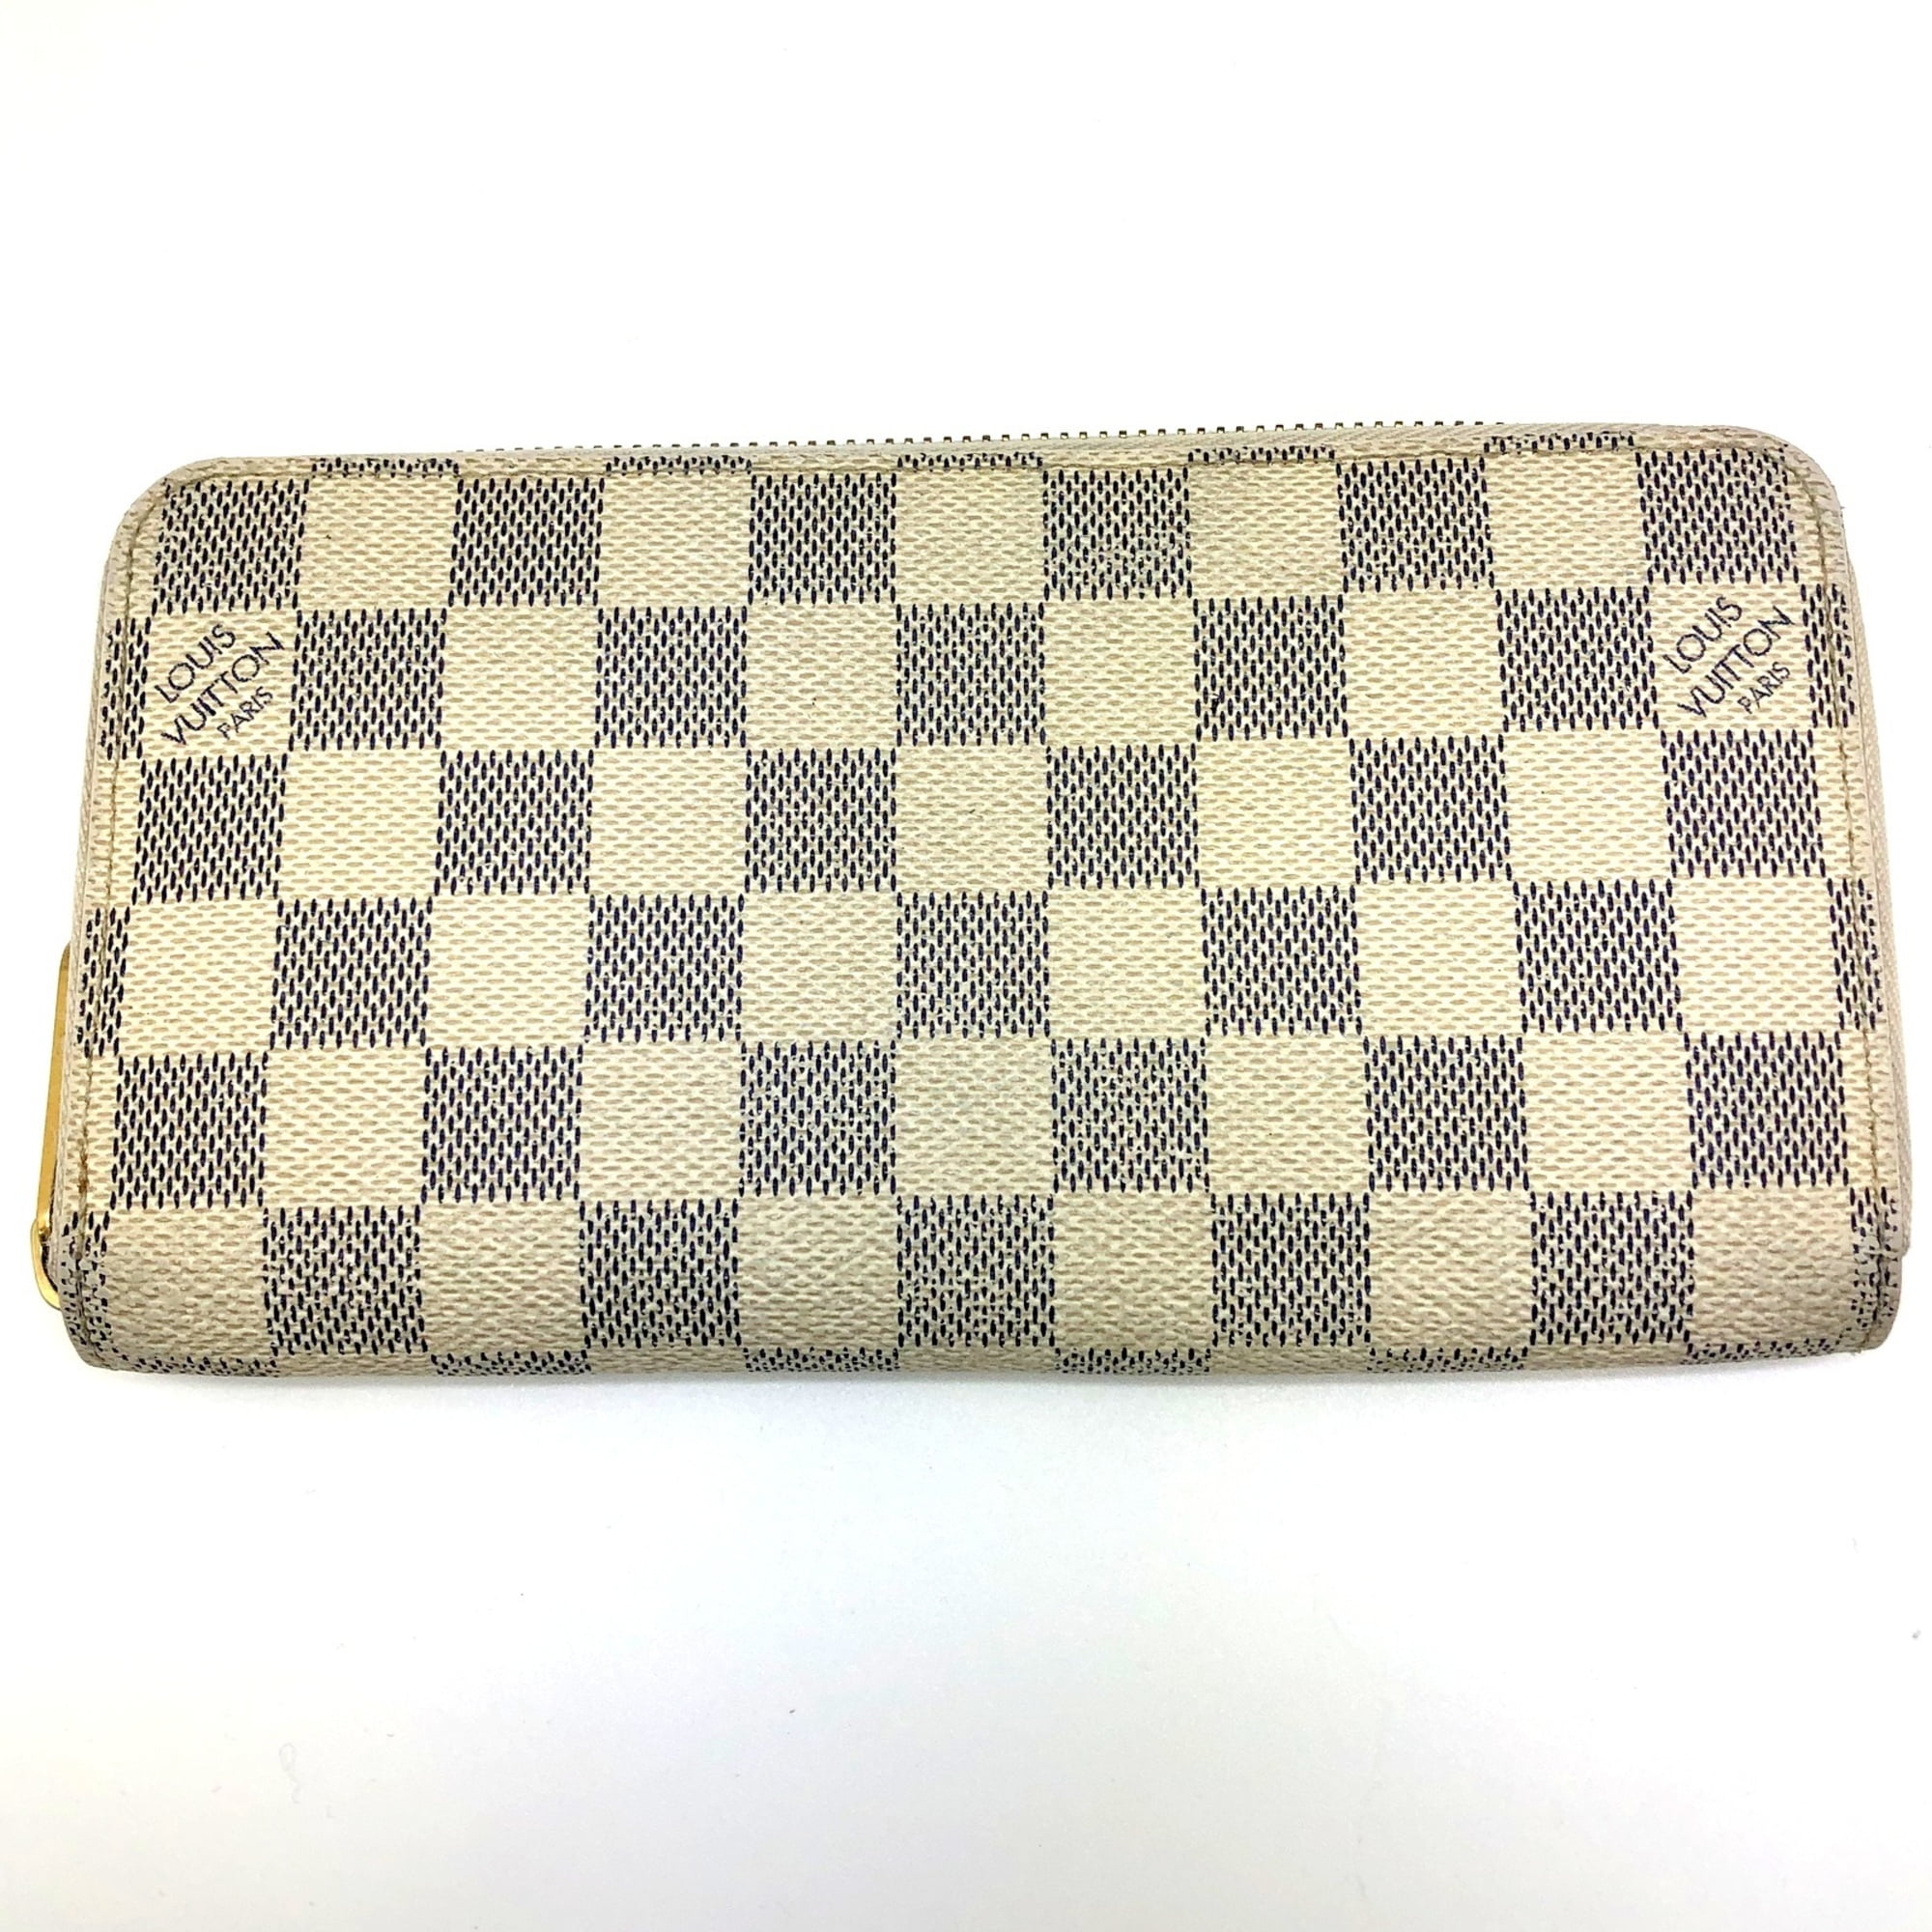 Louis Vuitton compact wallet from seller “Jerseyland020”. Took 21 days to  receive in the U.S., cost $27.76. Has a soft outside touch with  rough/strong inside feel. Nice stitching and know it'll last